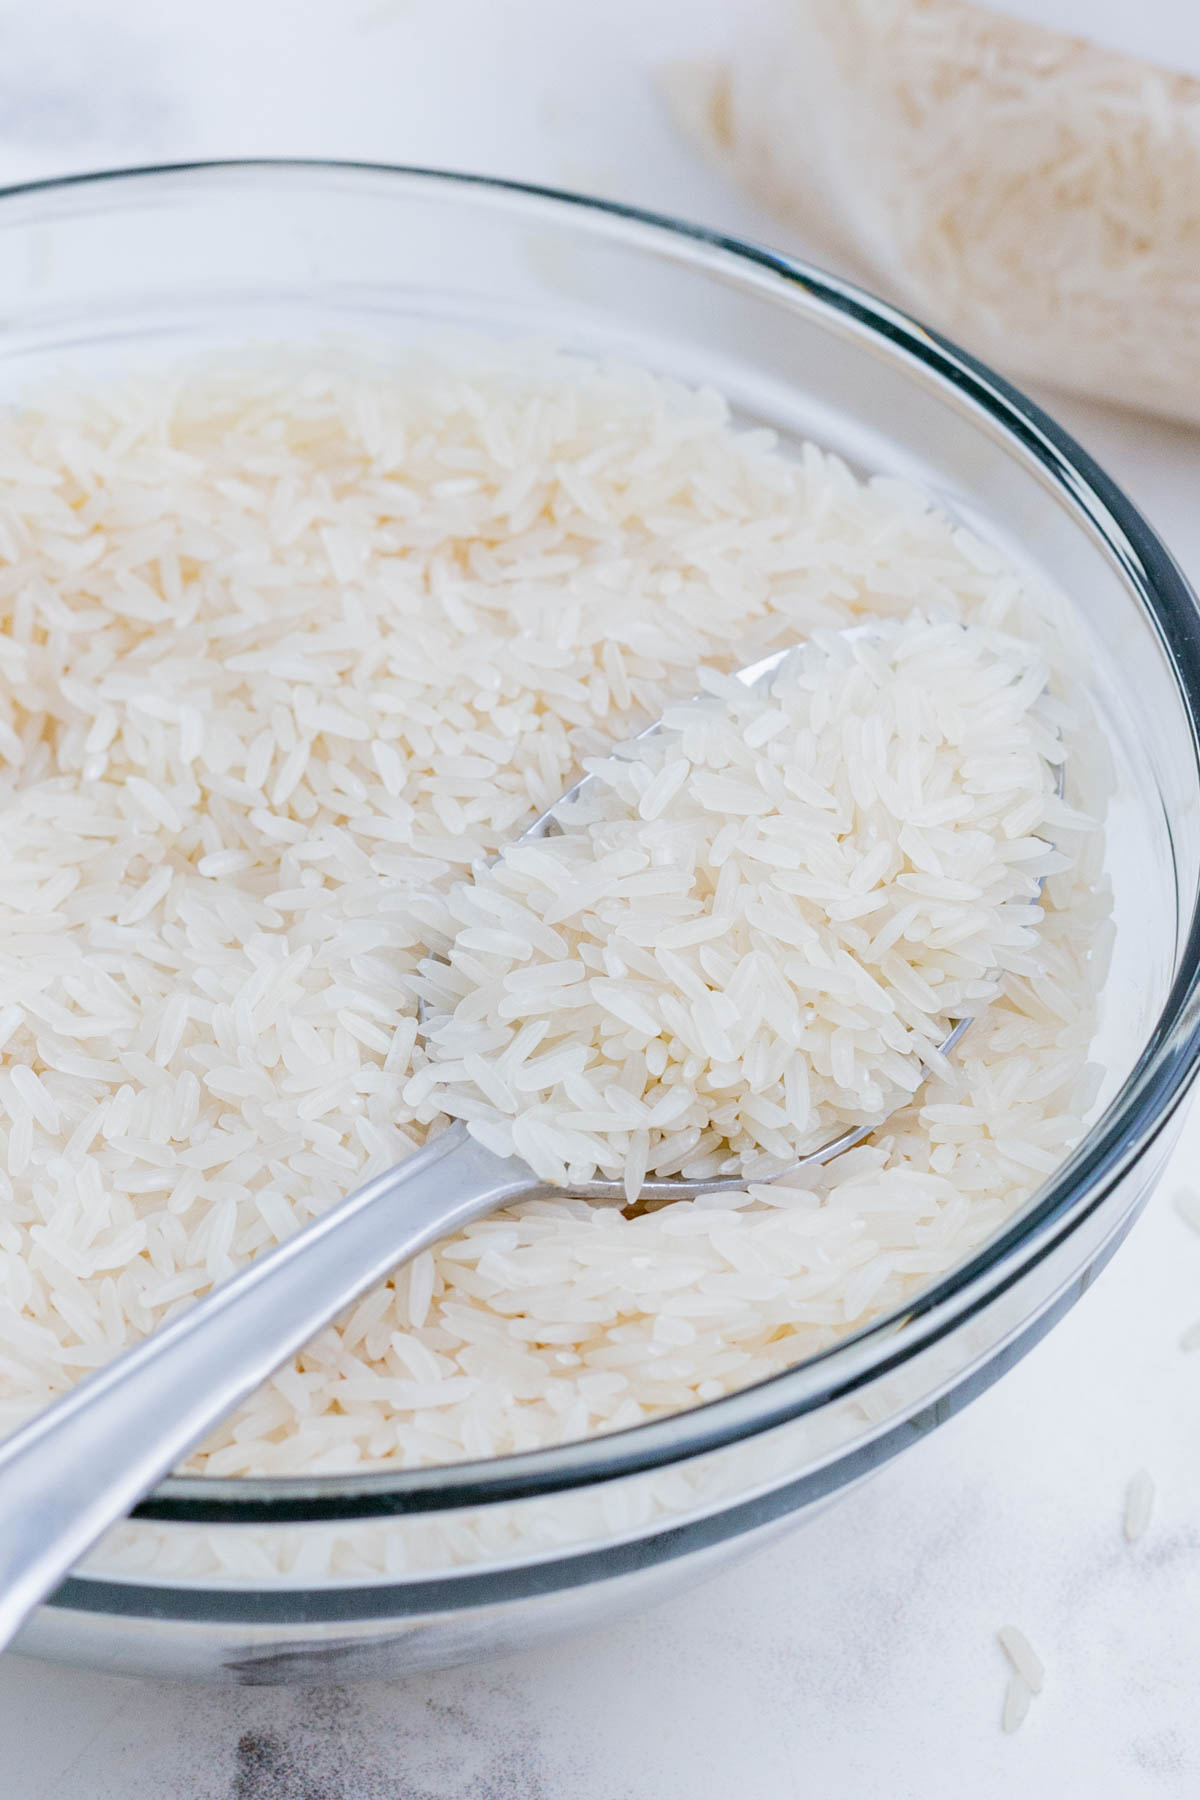 A spoon scoops Jasmine rice out of a glass bowl.